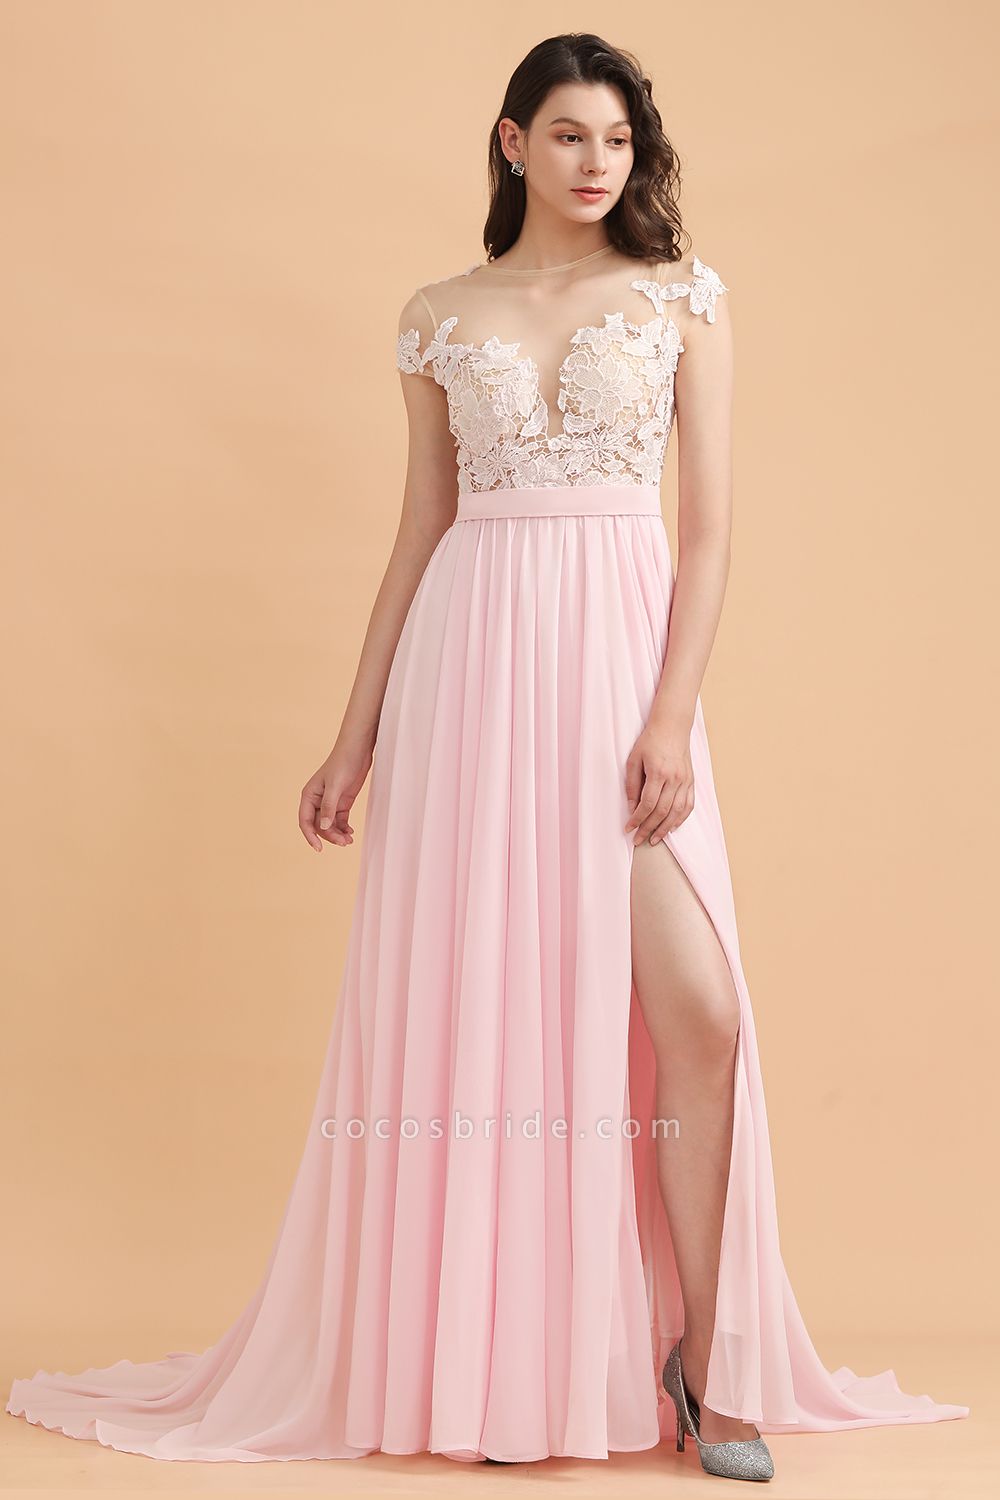 Cap Sleeves Lace Appliques A-Line Chiffon Bridesmaid Dress With Side Slit